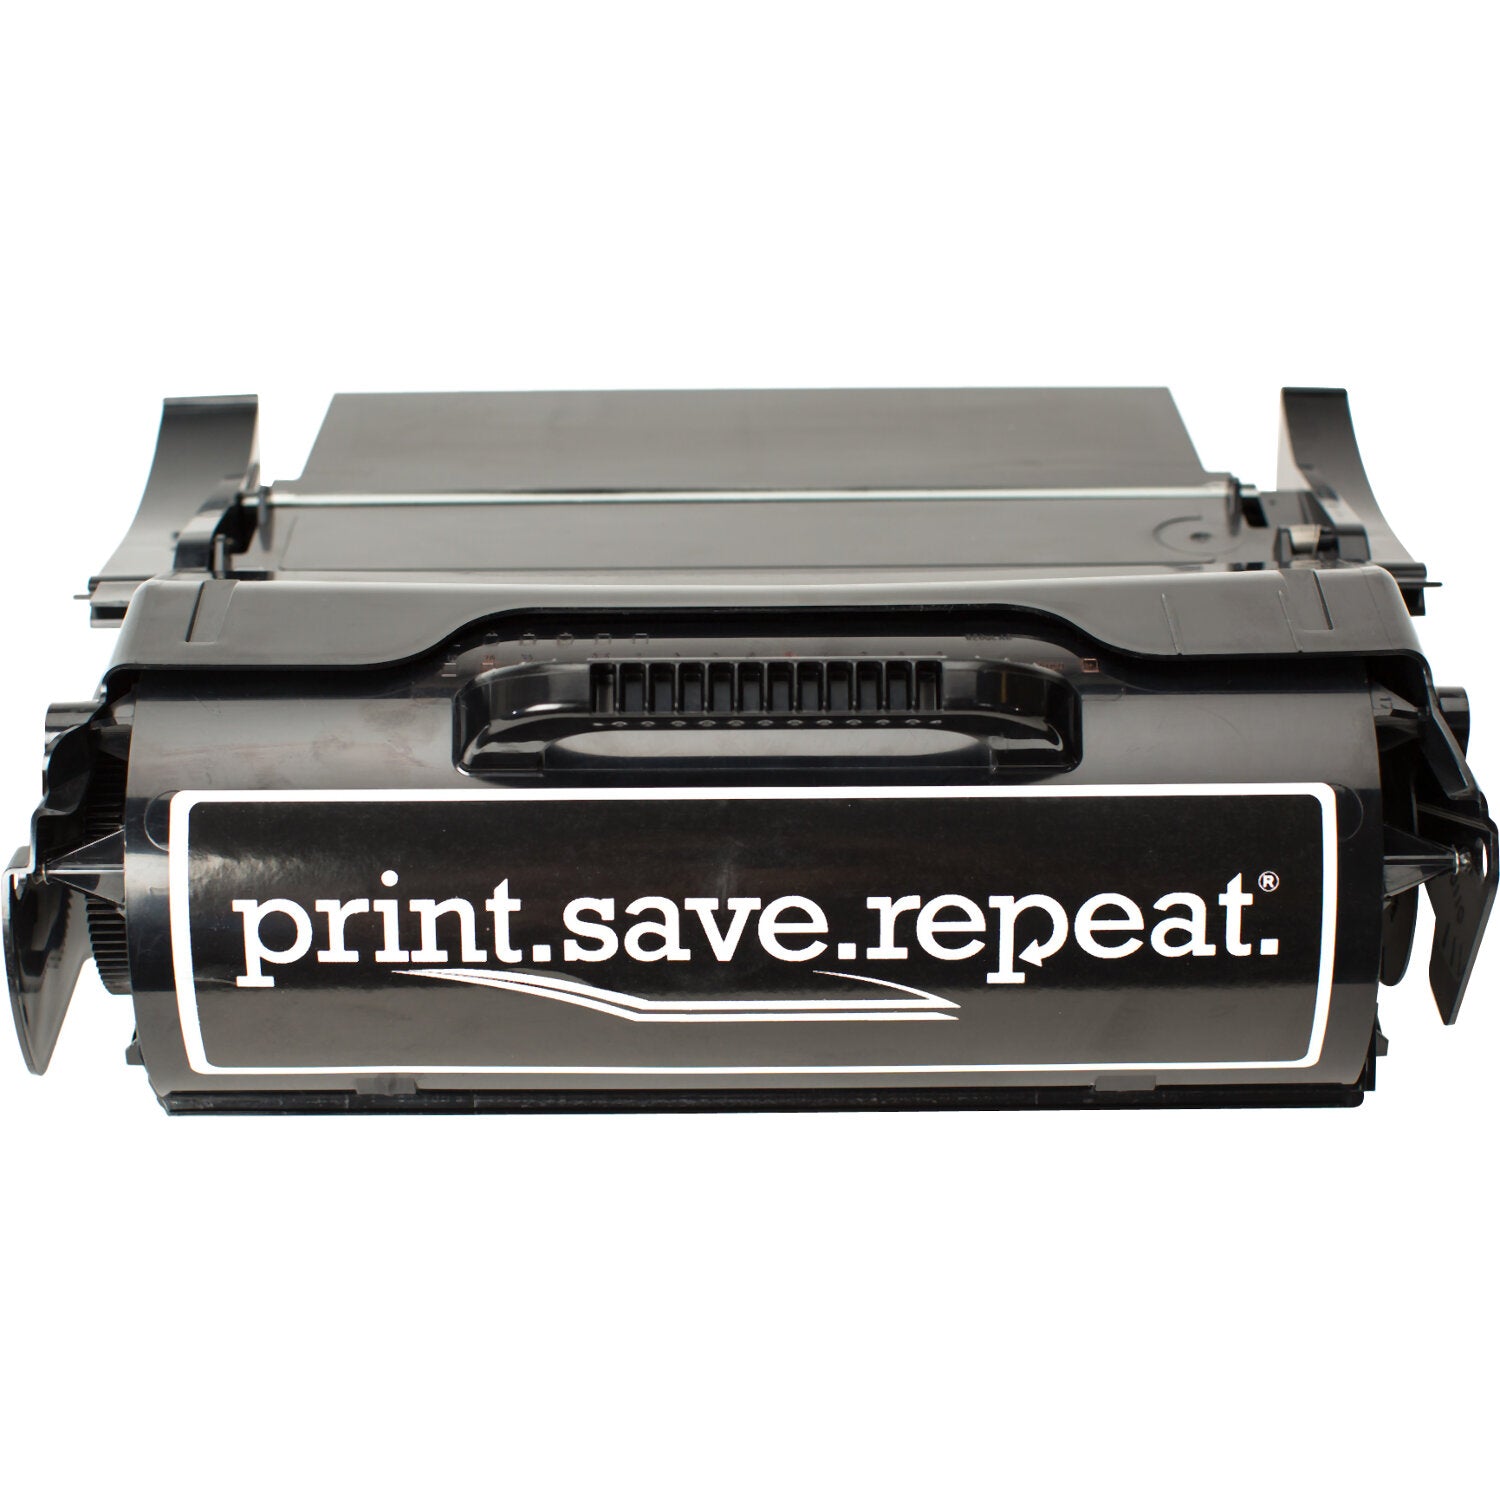 Print.Save.Repeat. Lexmark T650H11A High Yield Remanufactured Toner Cartridge for T650, T652, T654, T656 [25,000 Pages]